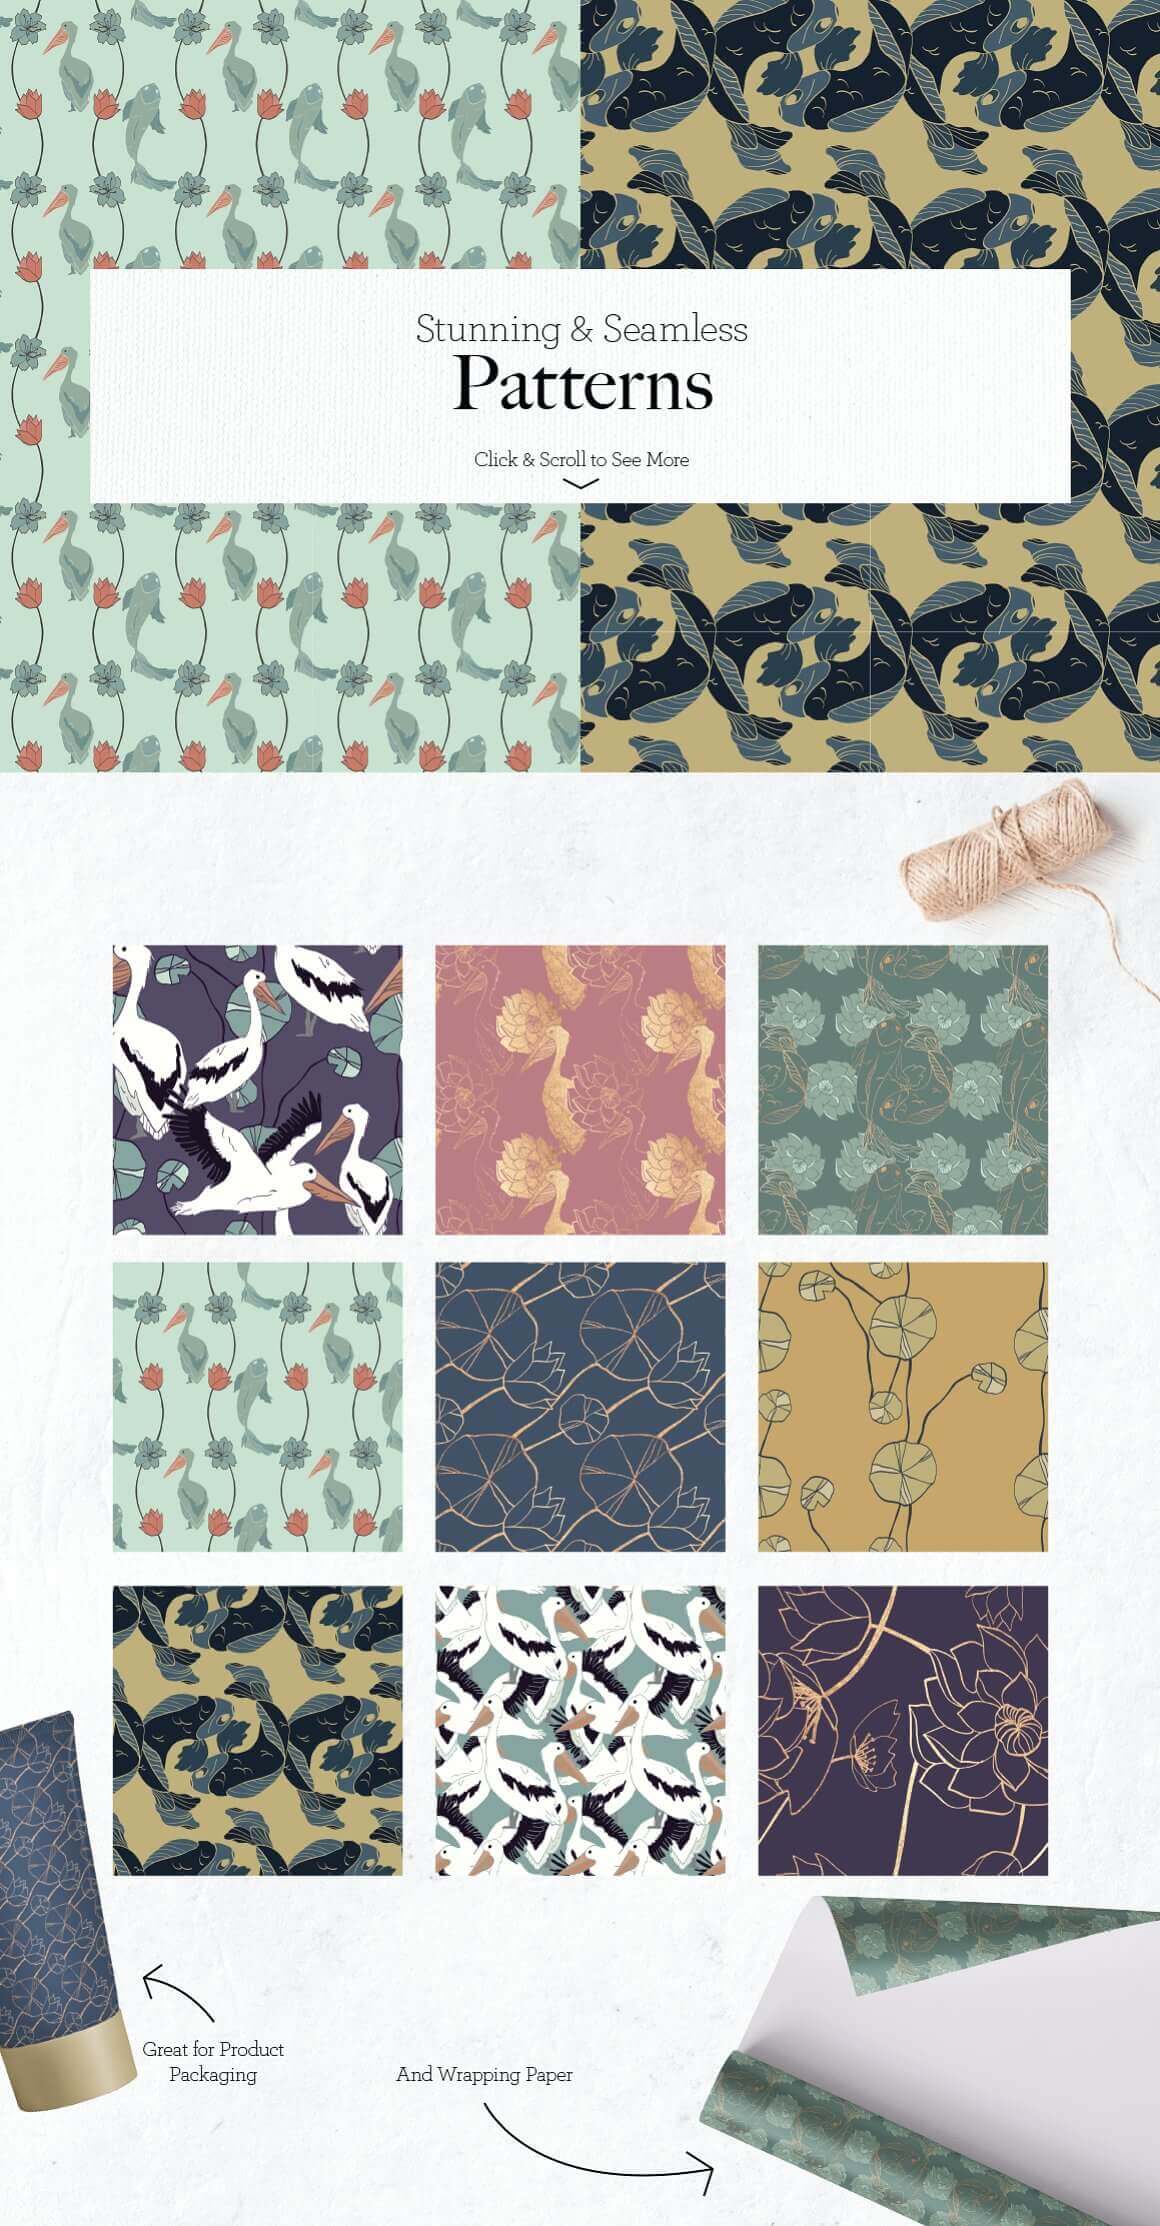 Stunning & Seamless Patterns Click & Scroll to See More.